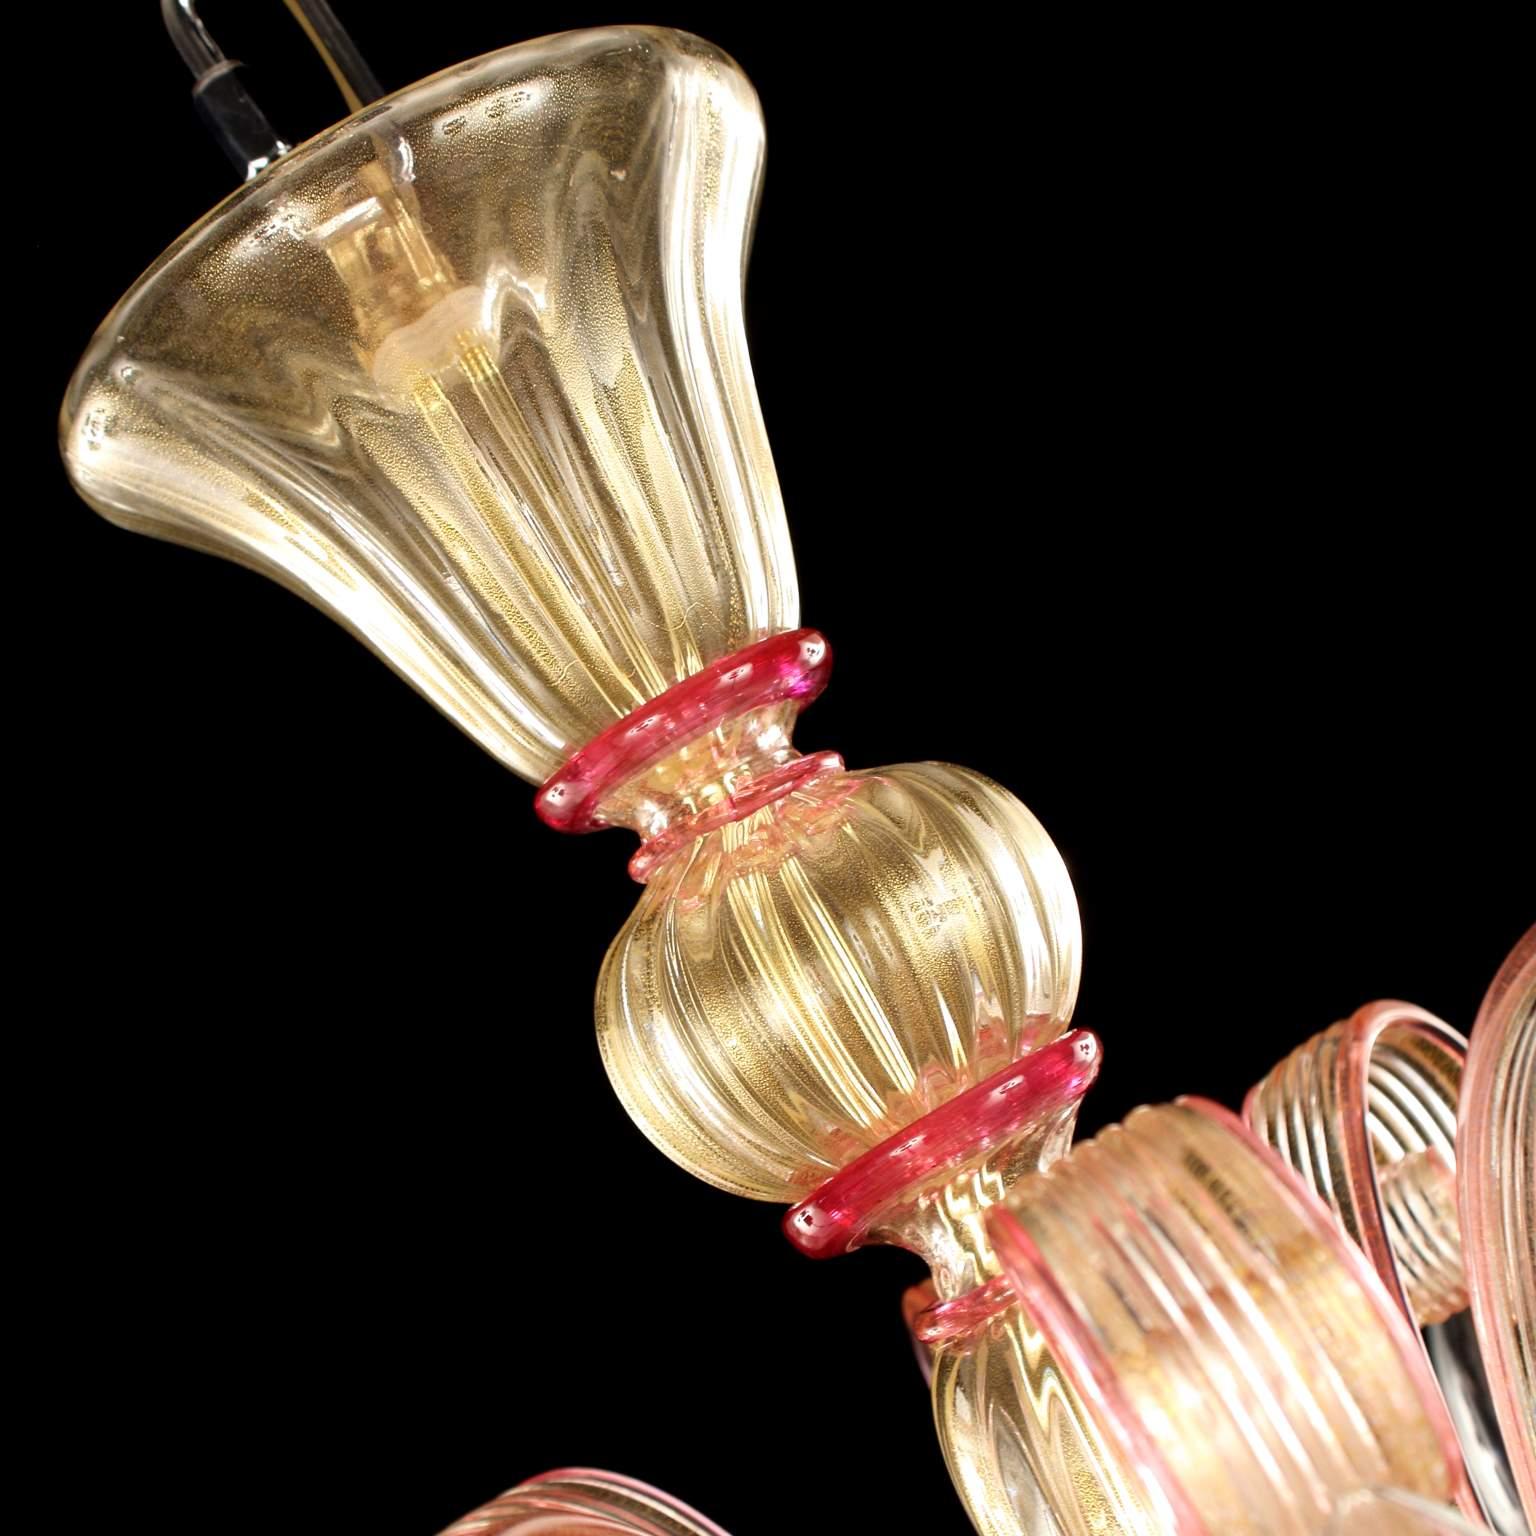 Capriccio chandelier, 5 lights, golden leaf artistic glass, with curly ornamental elements and amethyst details by Multiforme.
Inspired by the Classic Venetian tradition it is characterised by a central column where many blown glass “pastoral”